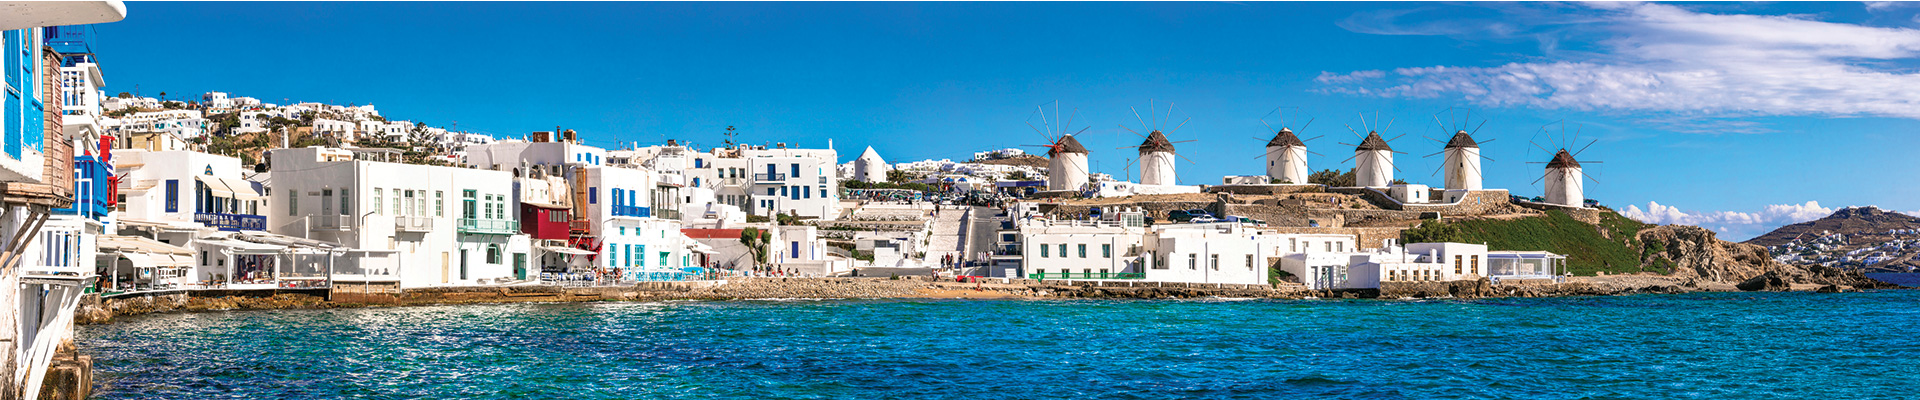 3* Athens & Celestyal Iconic Aegean Cruise - Greece Package (6 Nights)